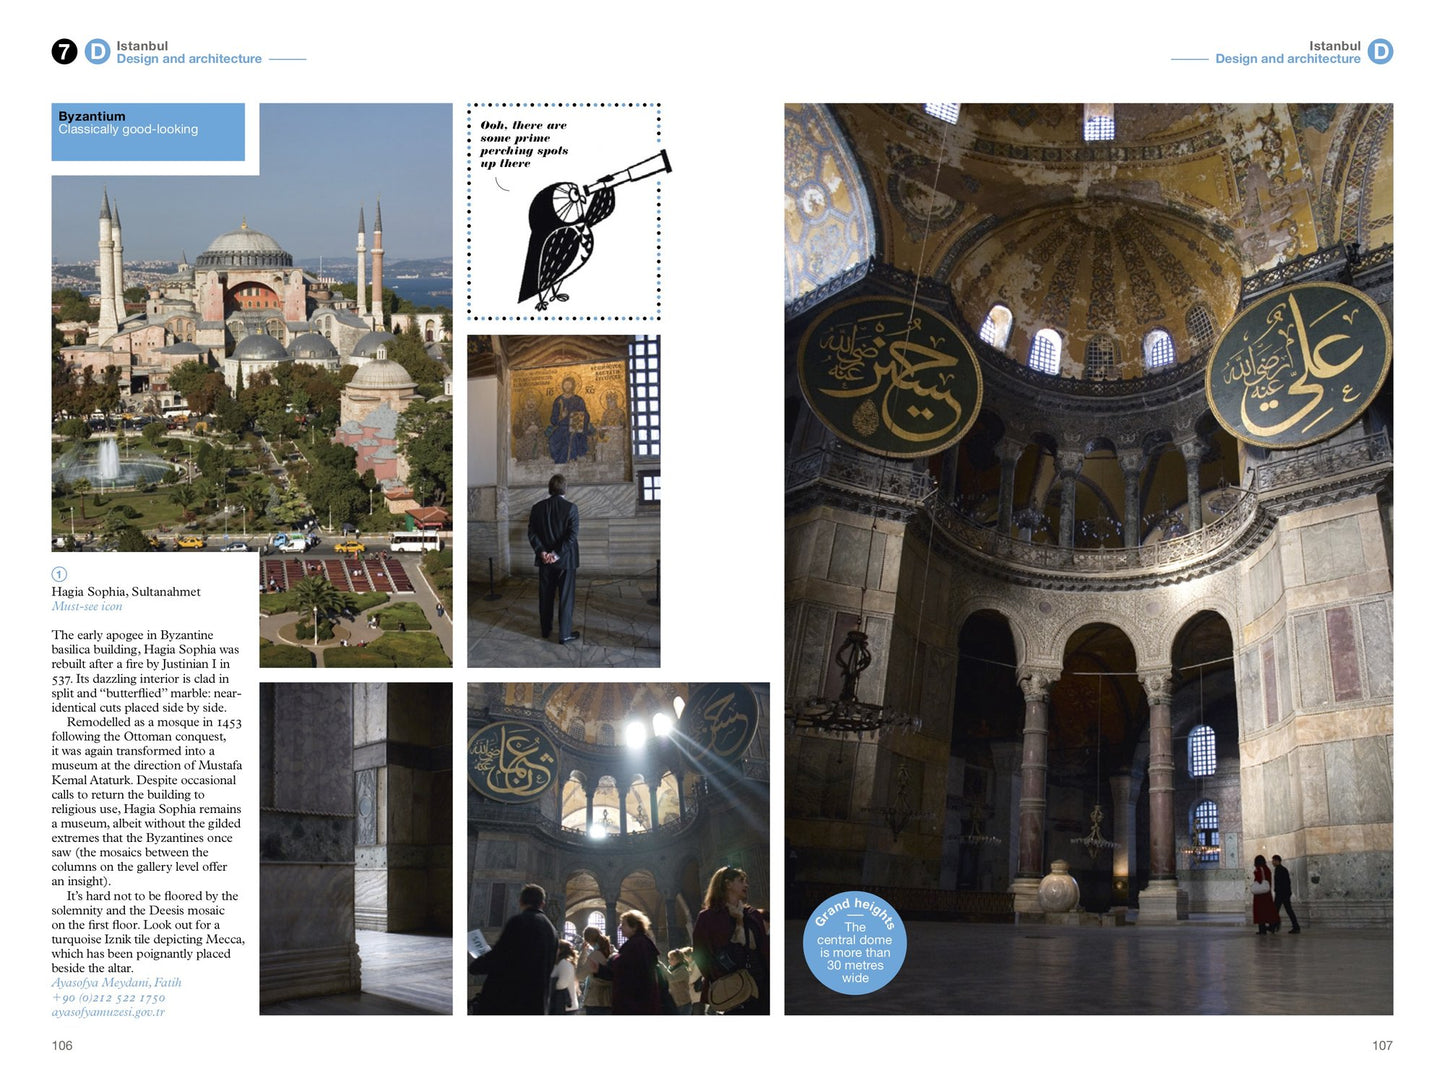 The Monocle Travel Guide Series Istanbul